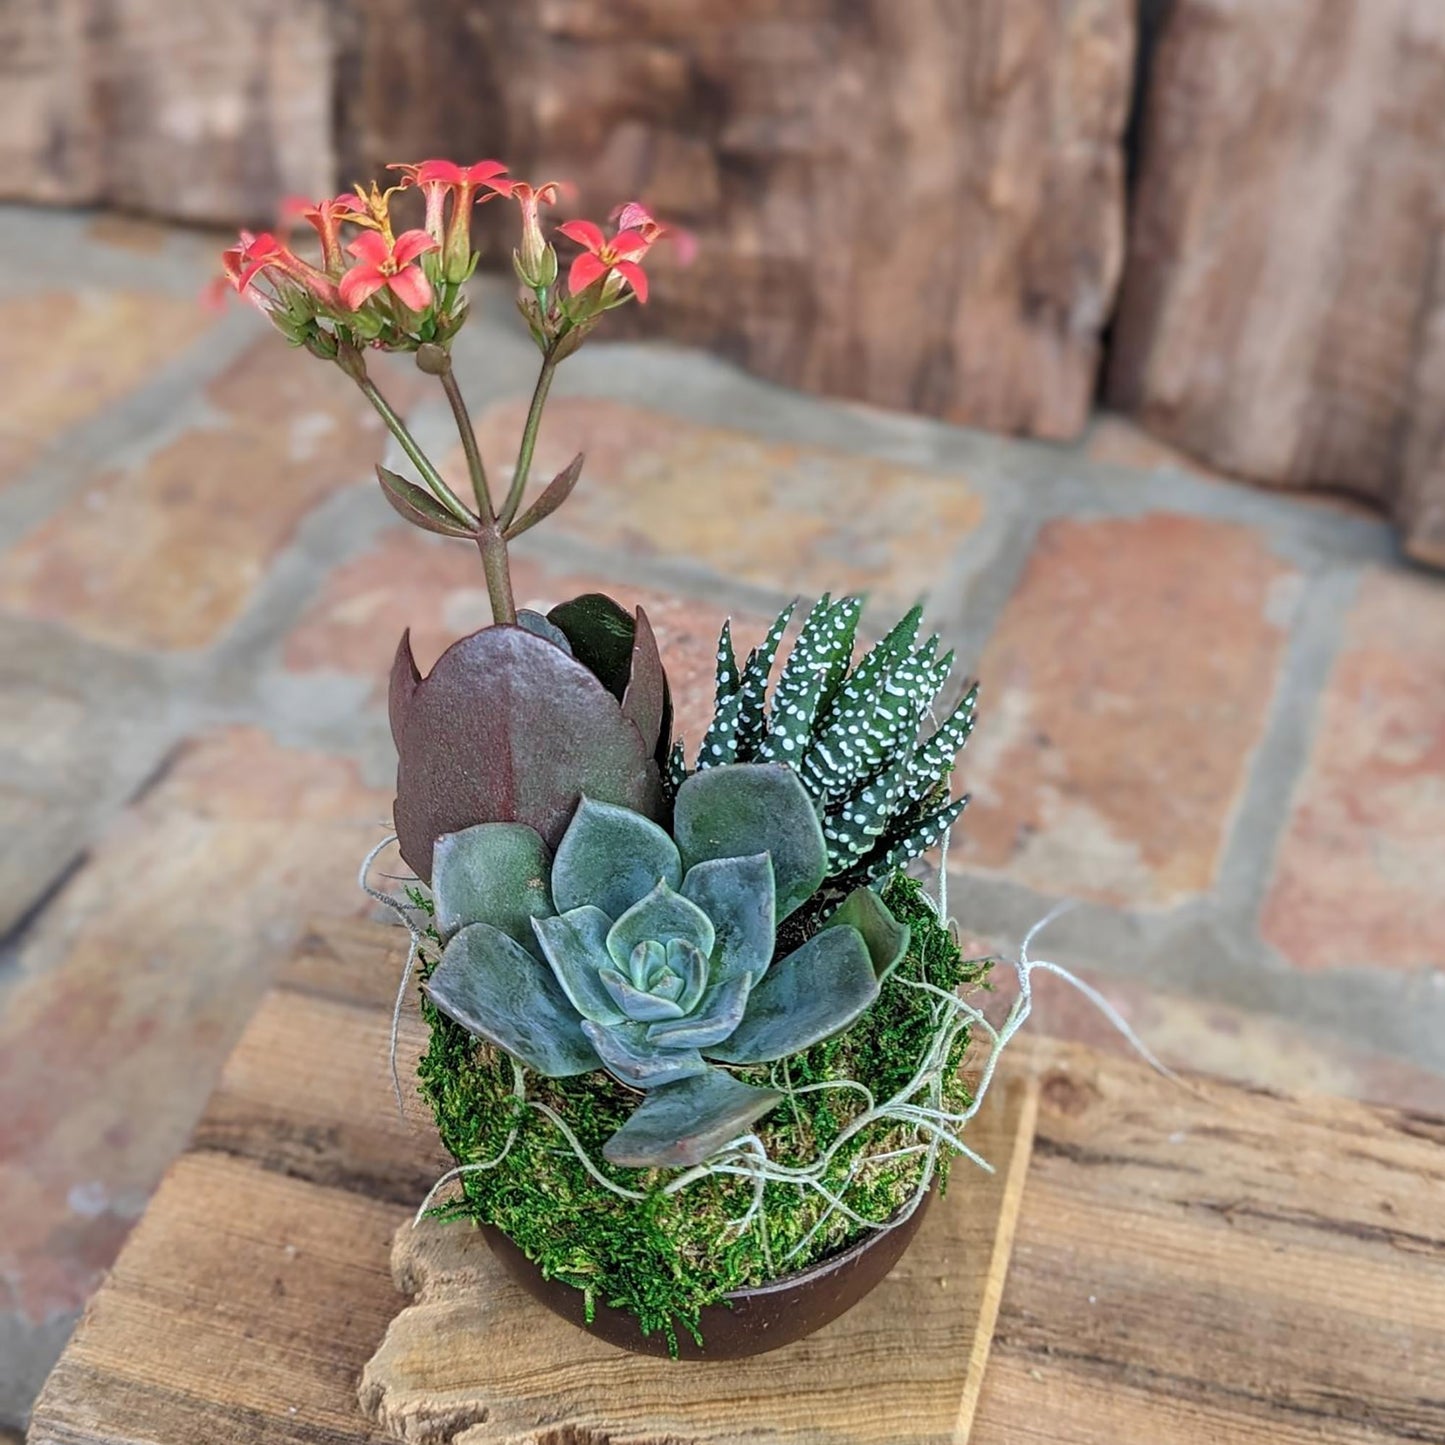 Blooming Live Succulent Arrangement in a Handcrafted Coconut Shell Pot